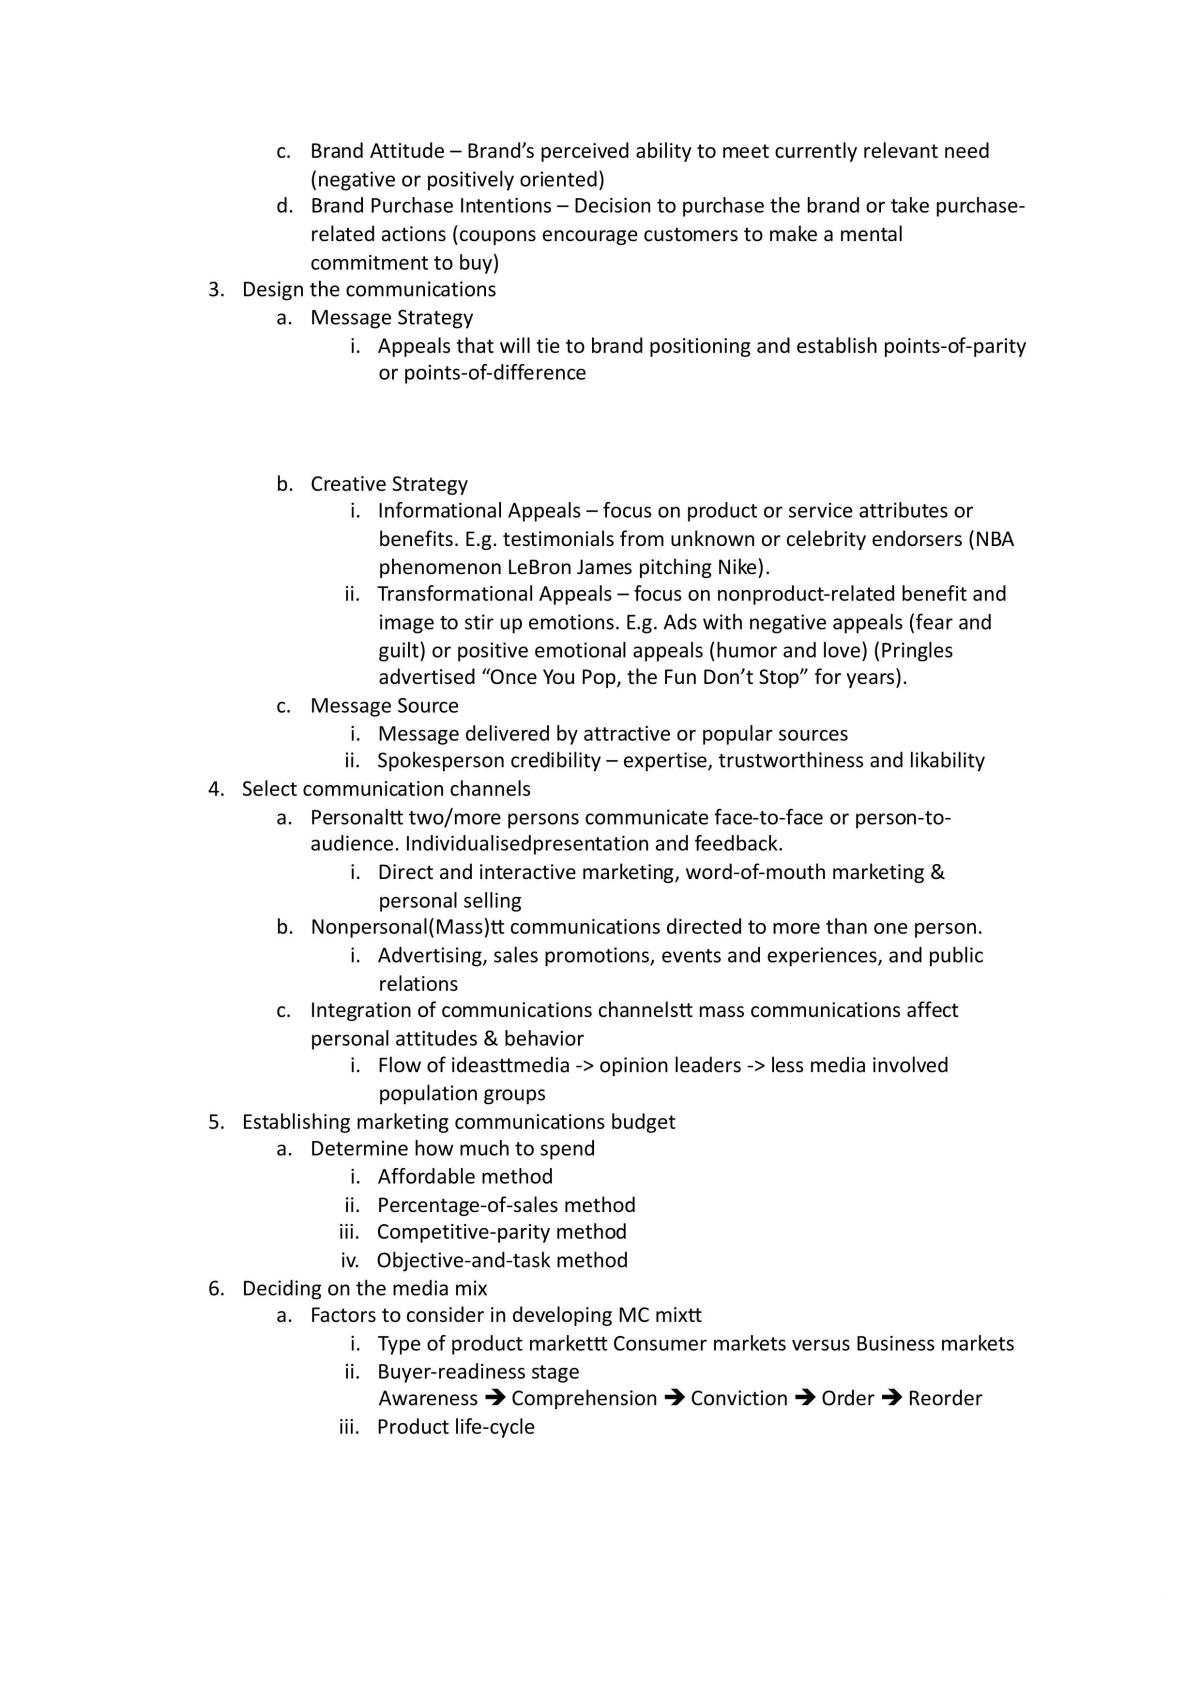 Marketing Management Exam Review - Page 22